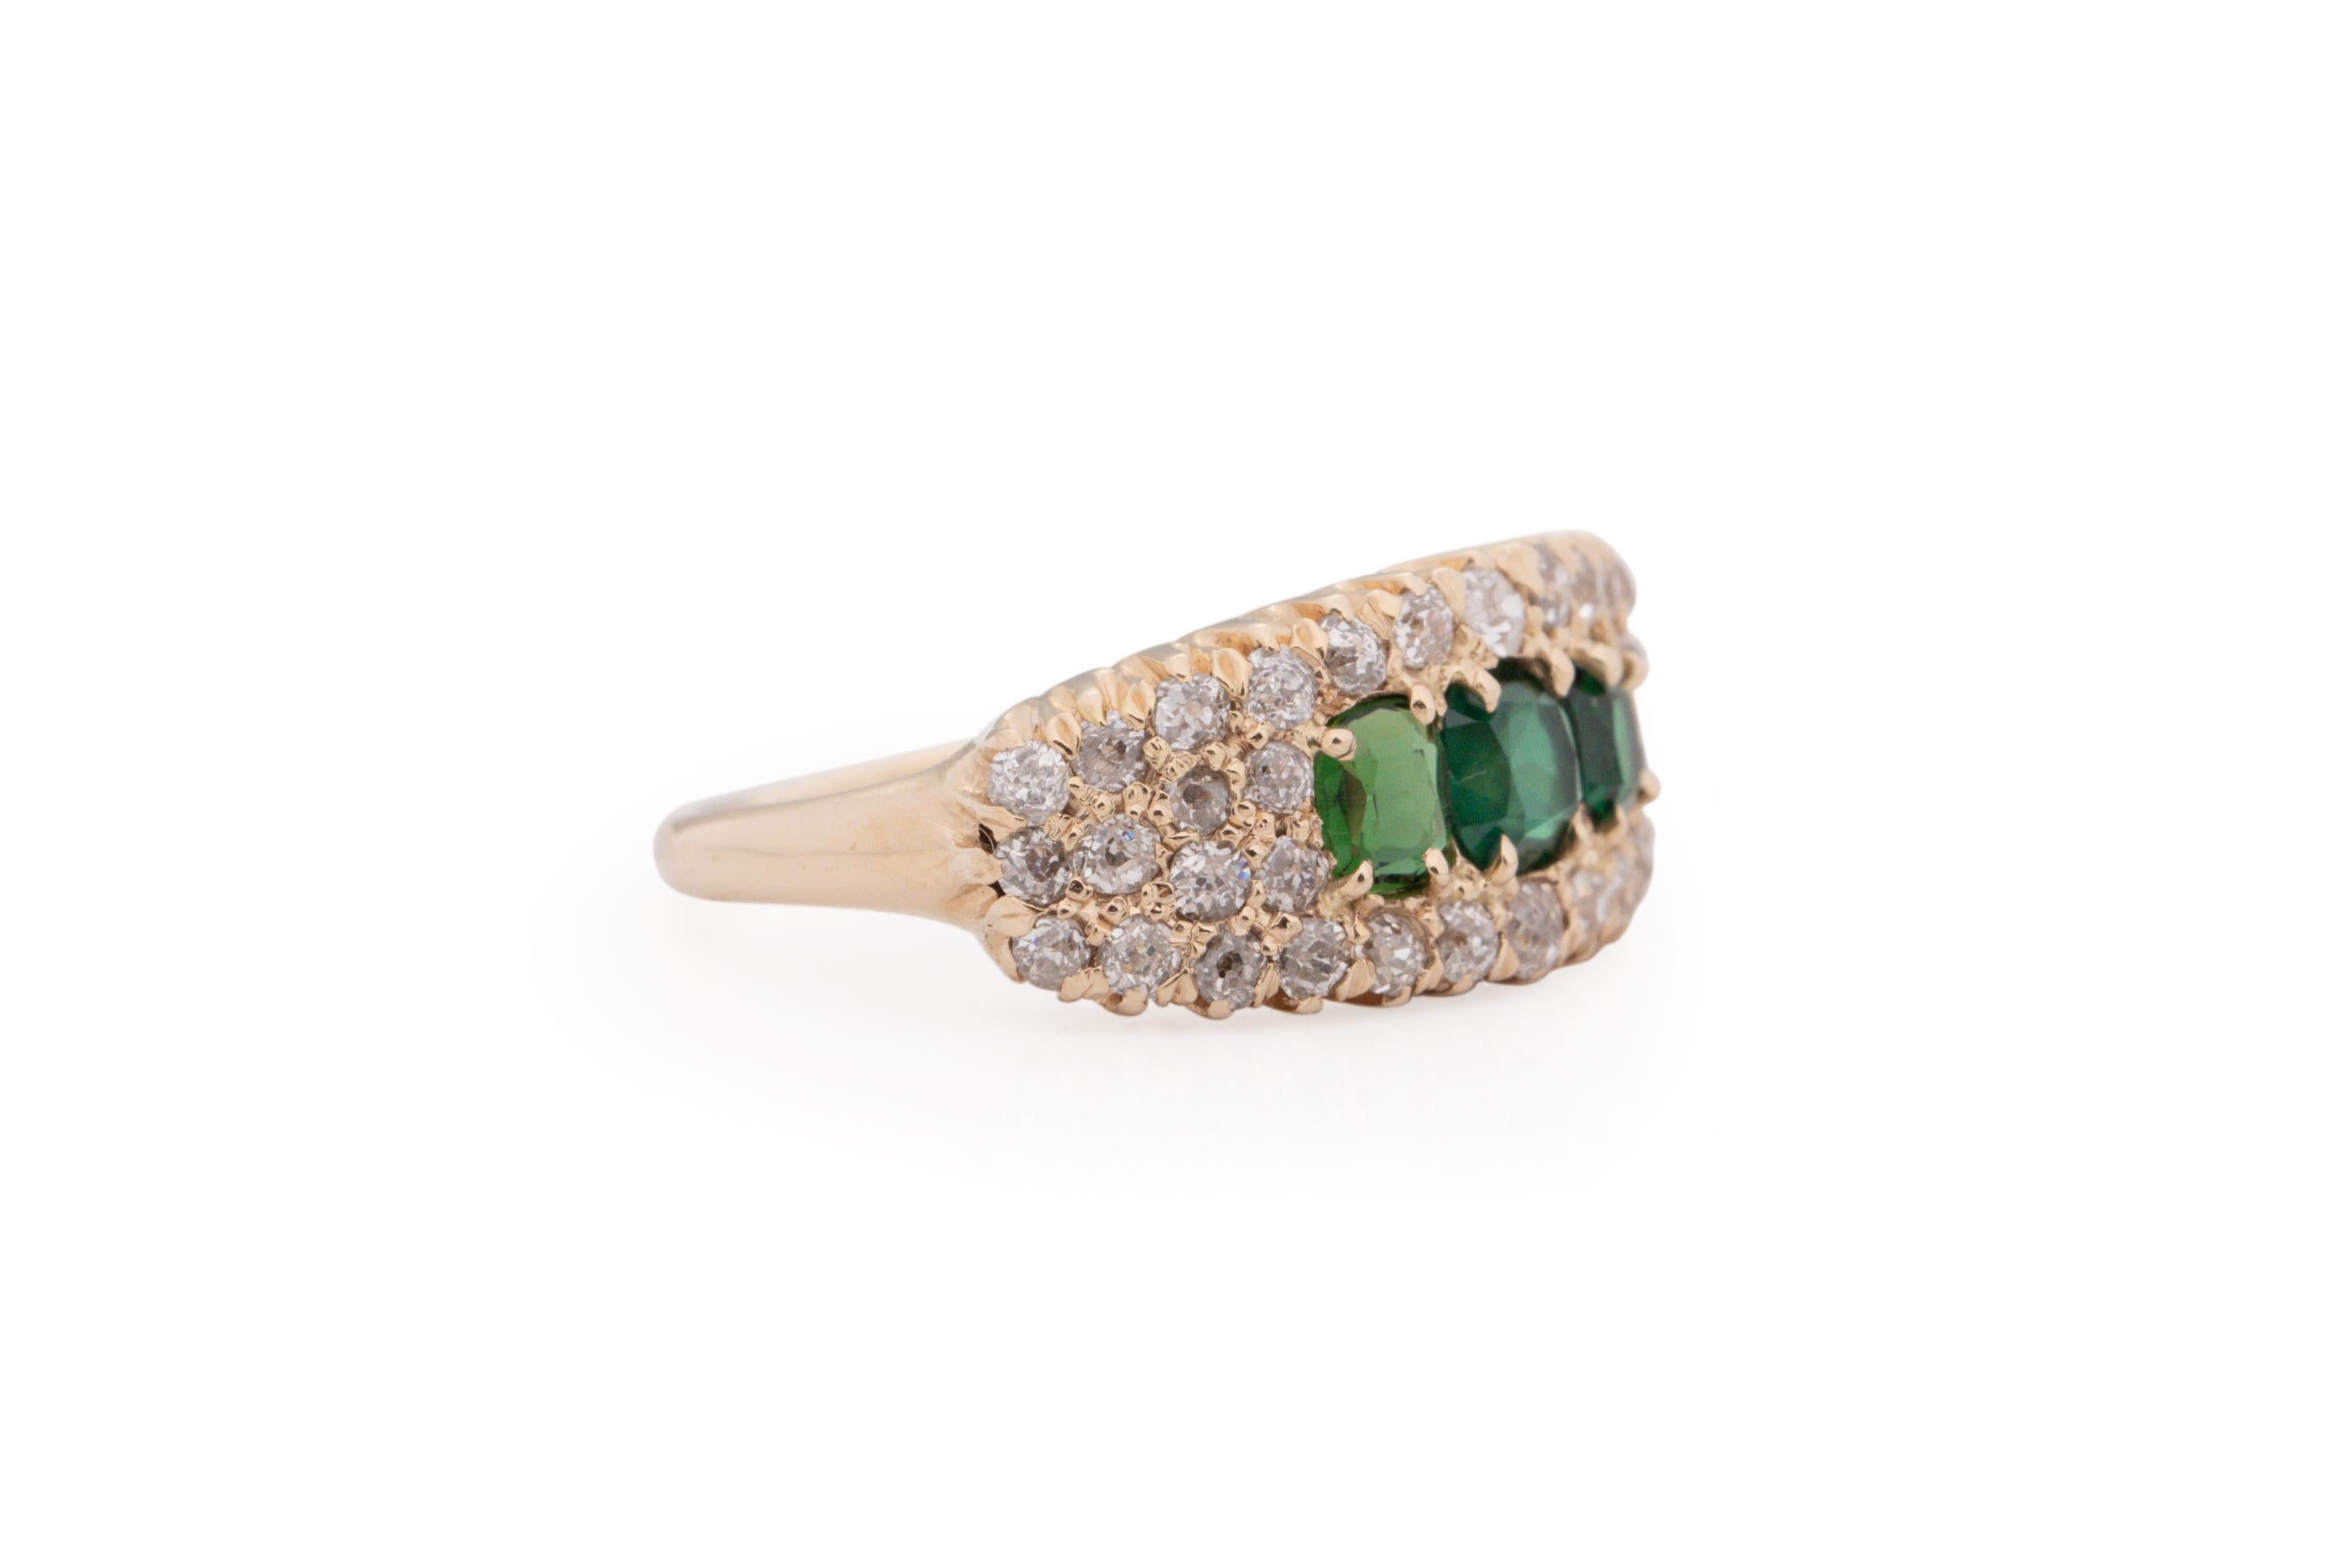 Ring Size: 6.75
Metal Type: 14 Karat Yellow Gold [Hallmarked, and Tested]
Weight: 5.4 grams

Diamond Details:
Weight: 1.00 carat
Cut: Old Mine Brilliant
Color: G-H-I
Clarity: VS/SI

3 Stone Details:
Type: Emerald (Synthetic)
Weight: .75 carat total